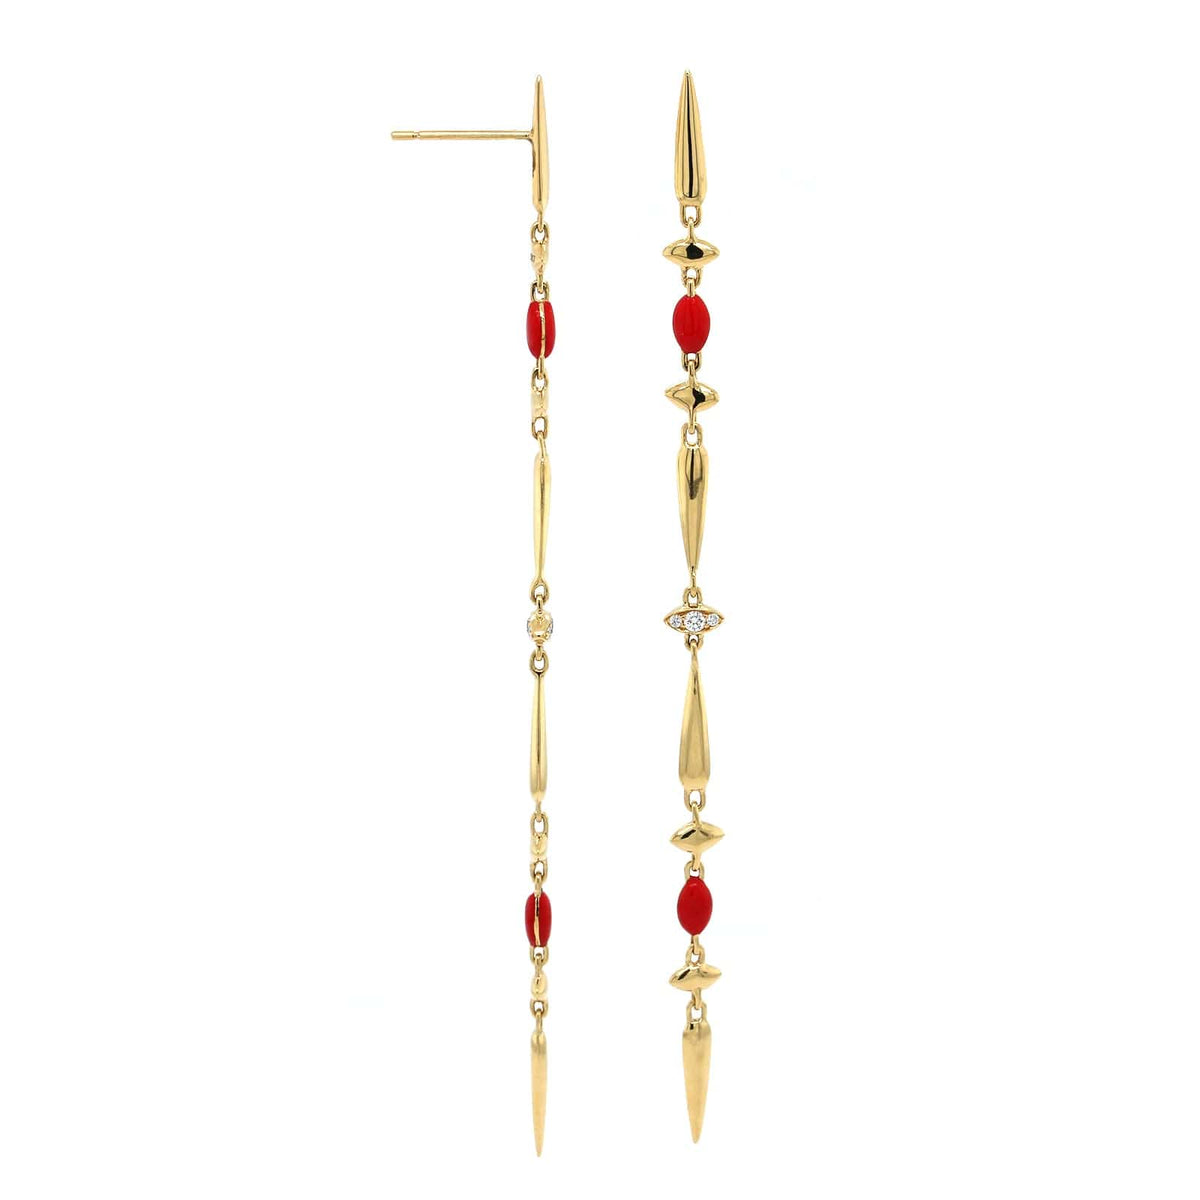 Etho Maria 18K Yellow Gold Diamond with Red Ceramic Drop Earrings